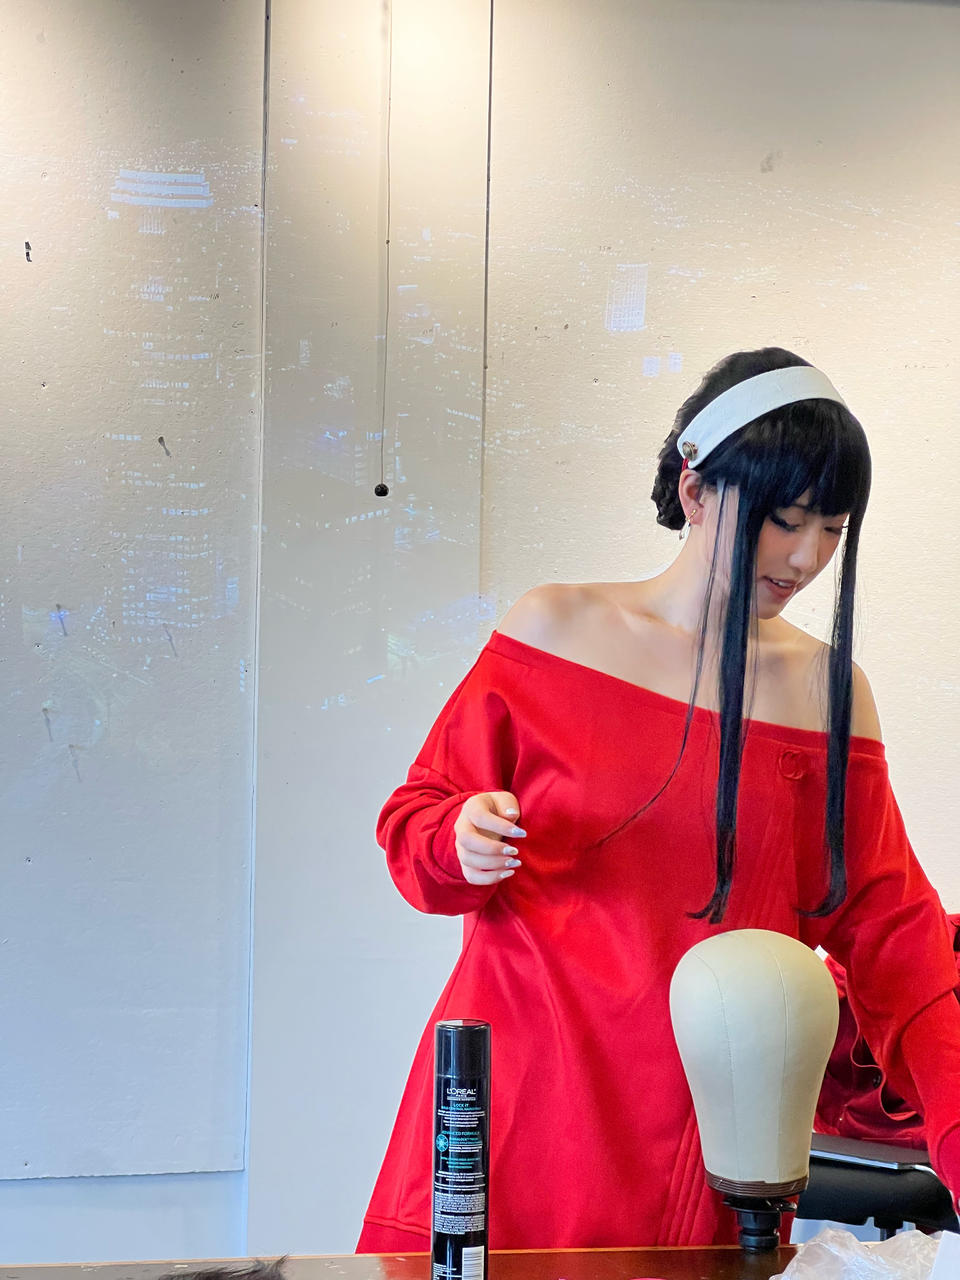 The author dressed as Yor Forger, a female character from the Japanese anime and manga series Spy × Family, doing a demo on wig styling in class.